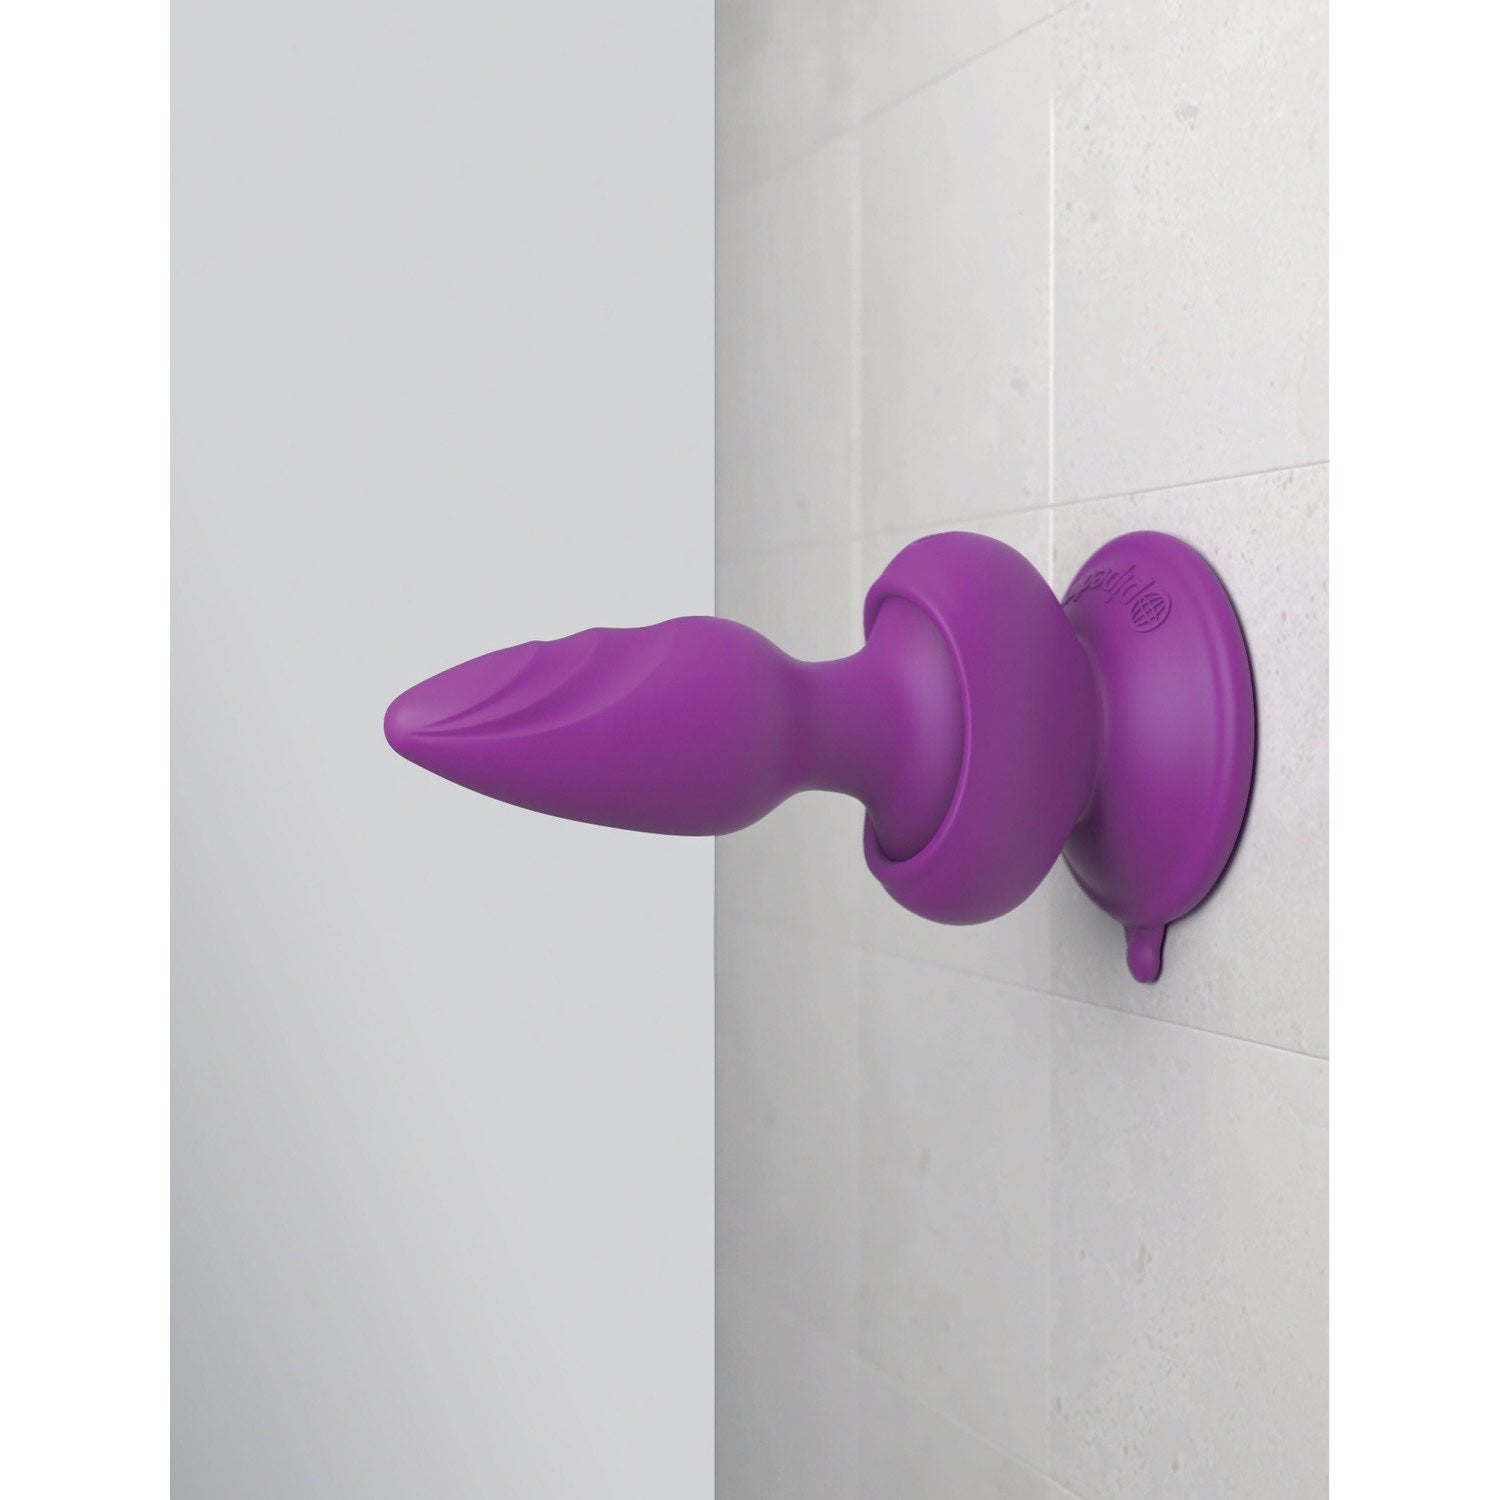 3Some Wall Banger Plug - Purple USB Rechargeable Vibrating Butt Plug with Wireless Remote by Pipedream